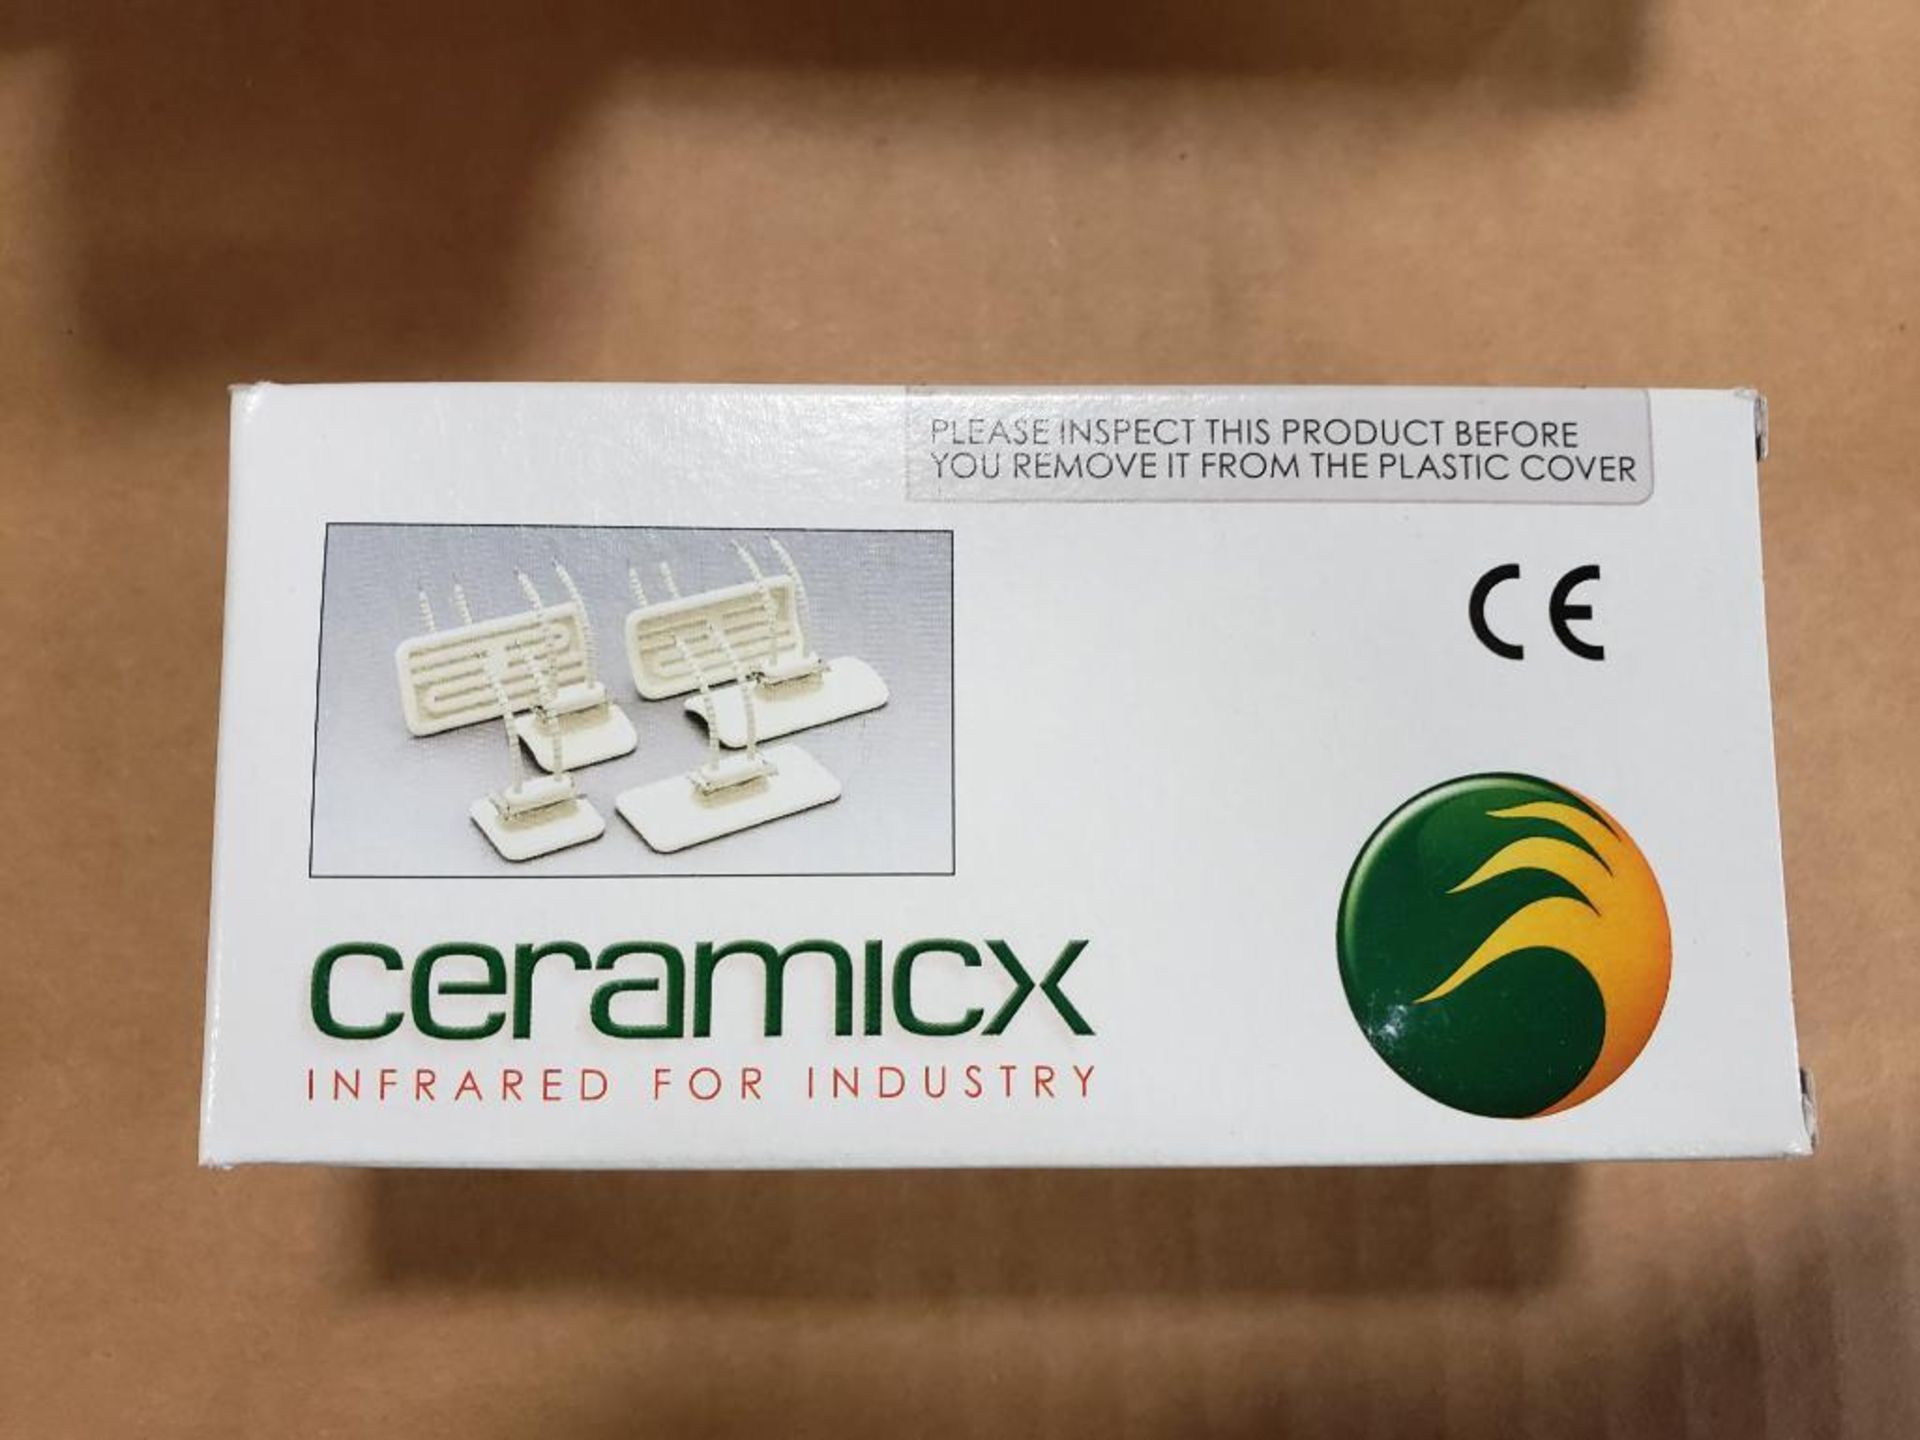 Qty 24 - Ceramicx infrared heating element. New in box. - Image 5 of 8